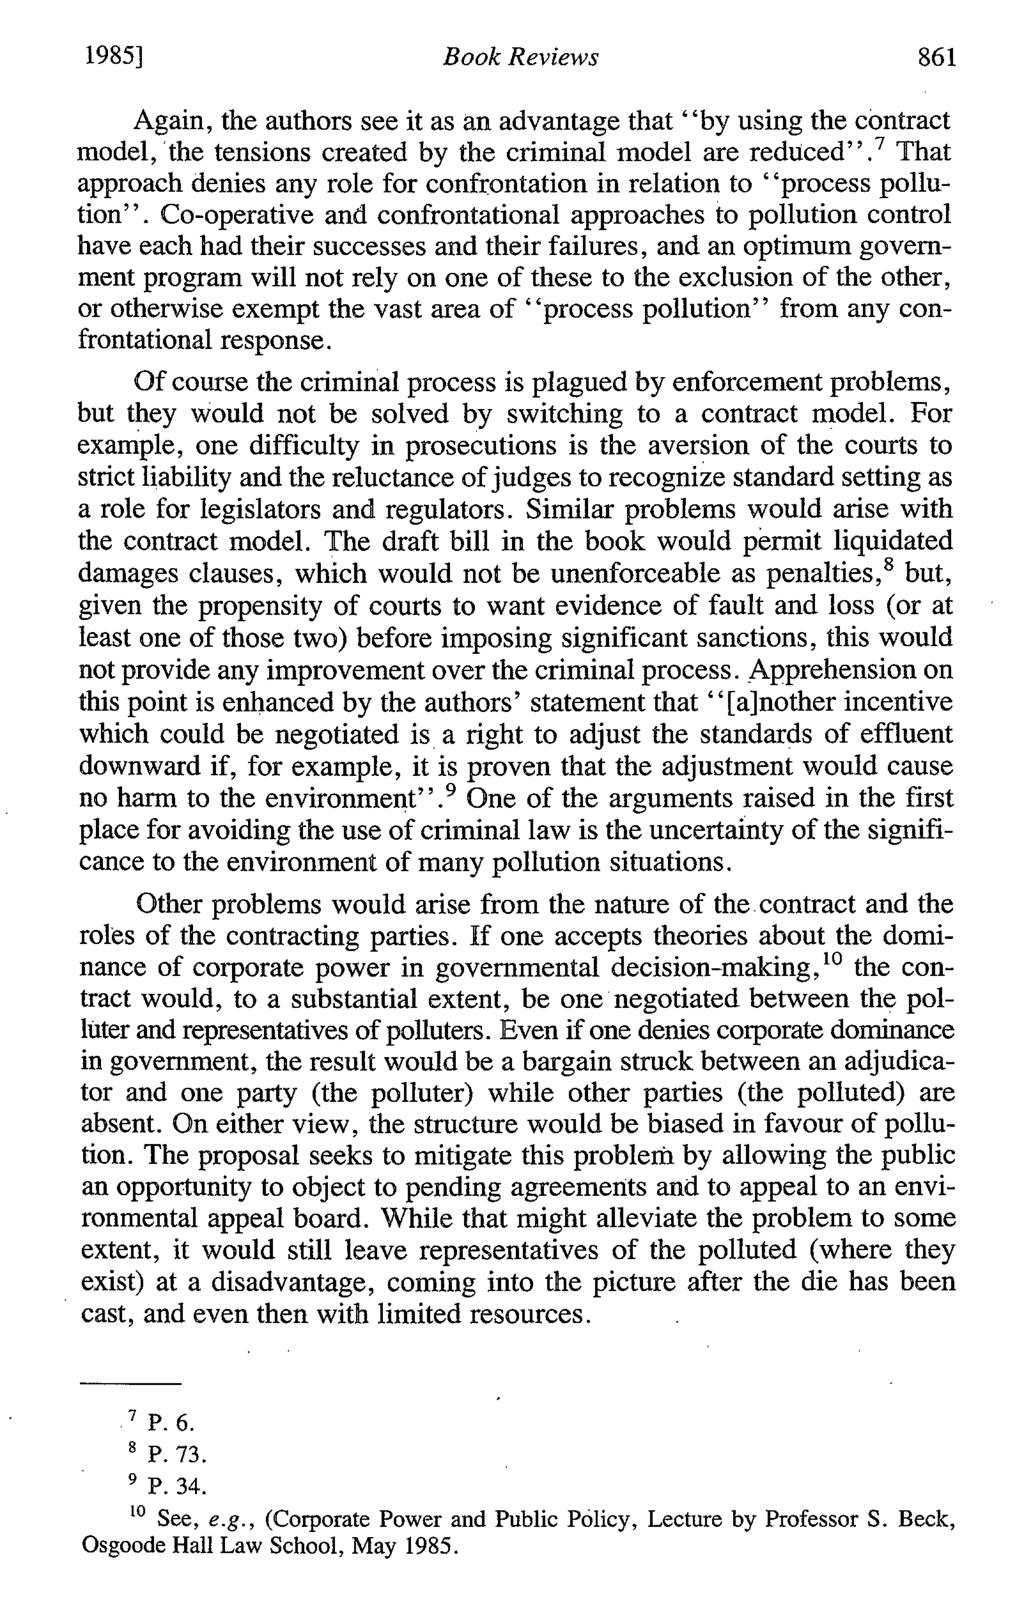 19851 Book Reviews 861 Again, the authors see it as an advantage that "by using the contract model, the tensions created by the criminal model are reduced".